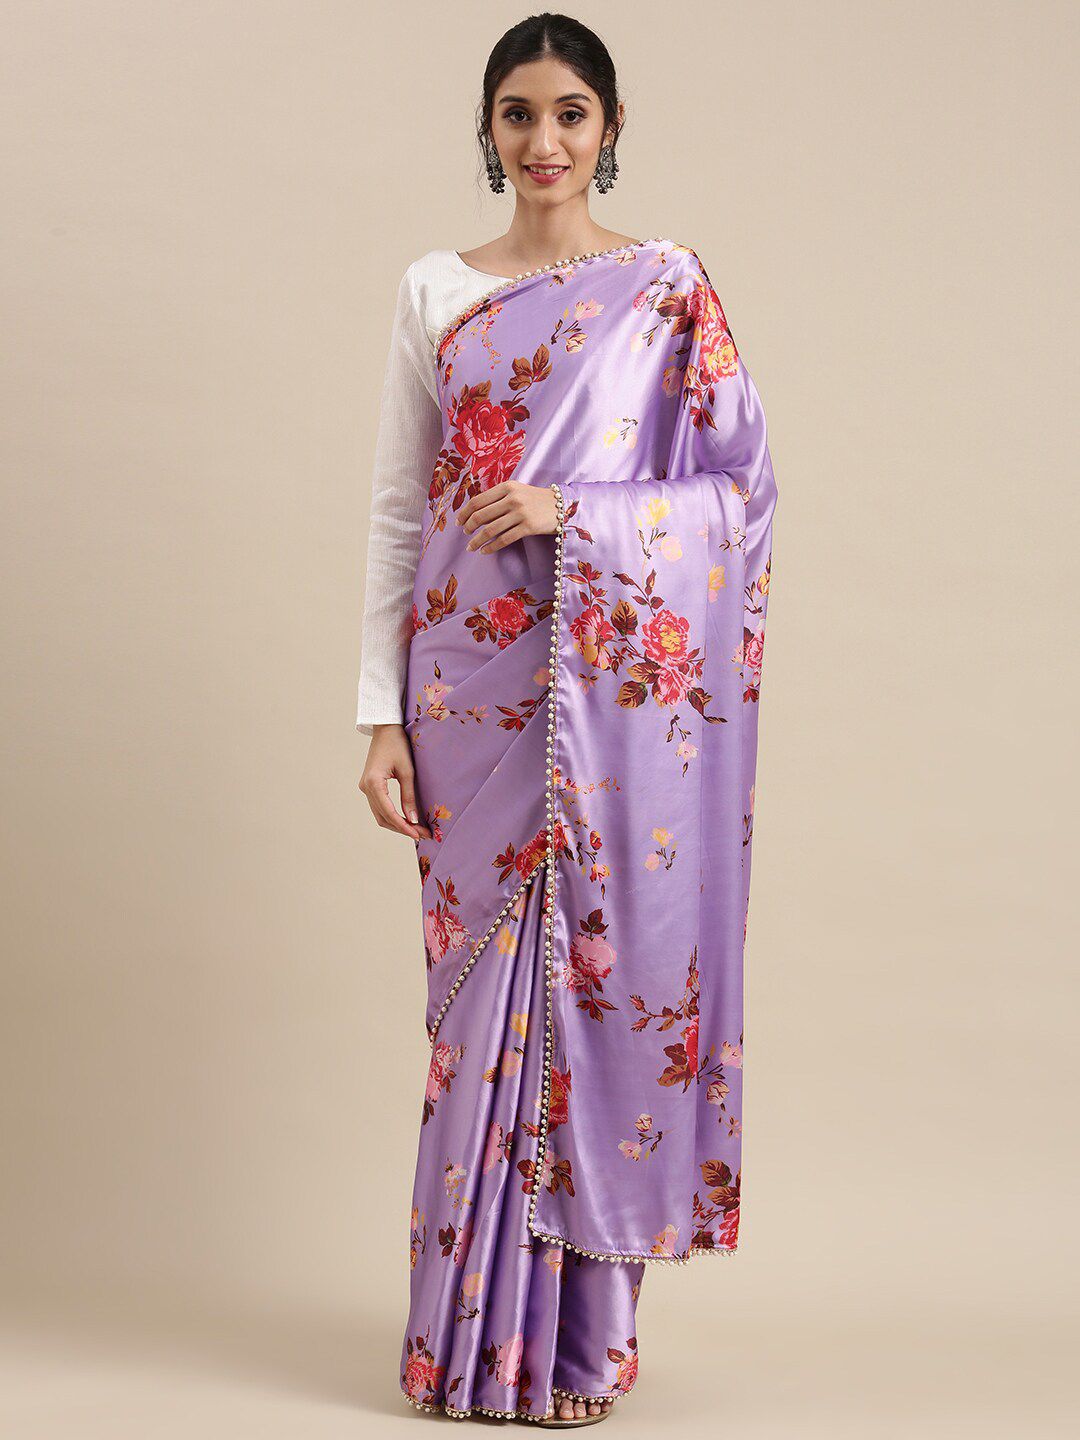 AVANSHEE Floral Beads and Stones Satin Saree Price in India